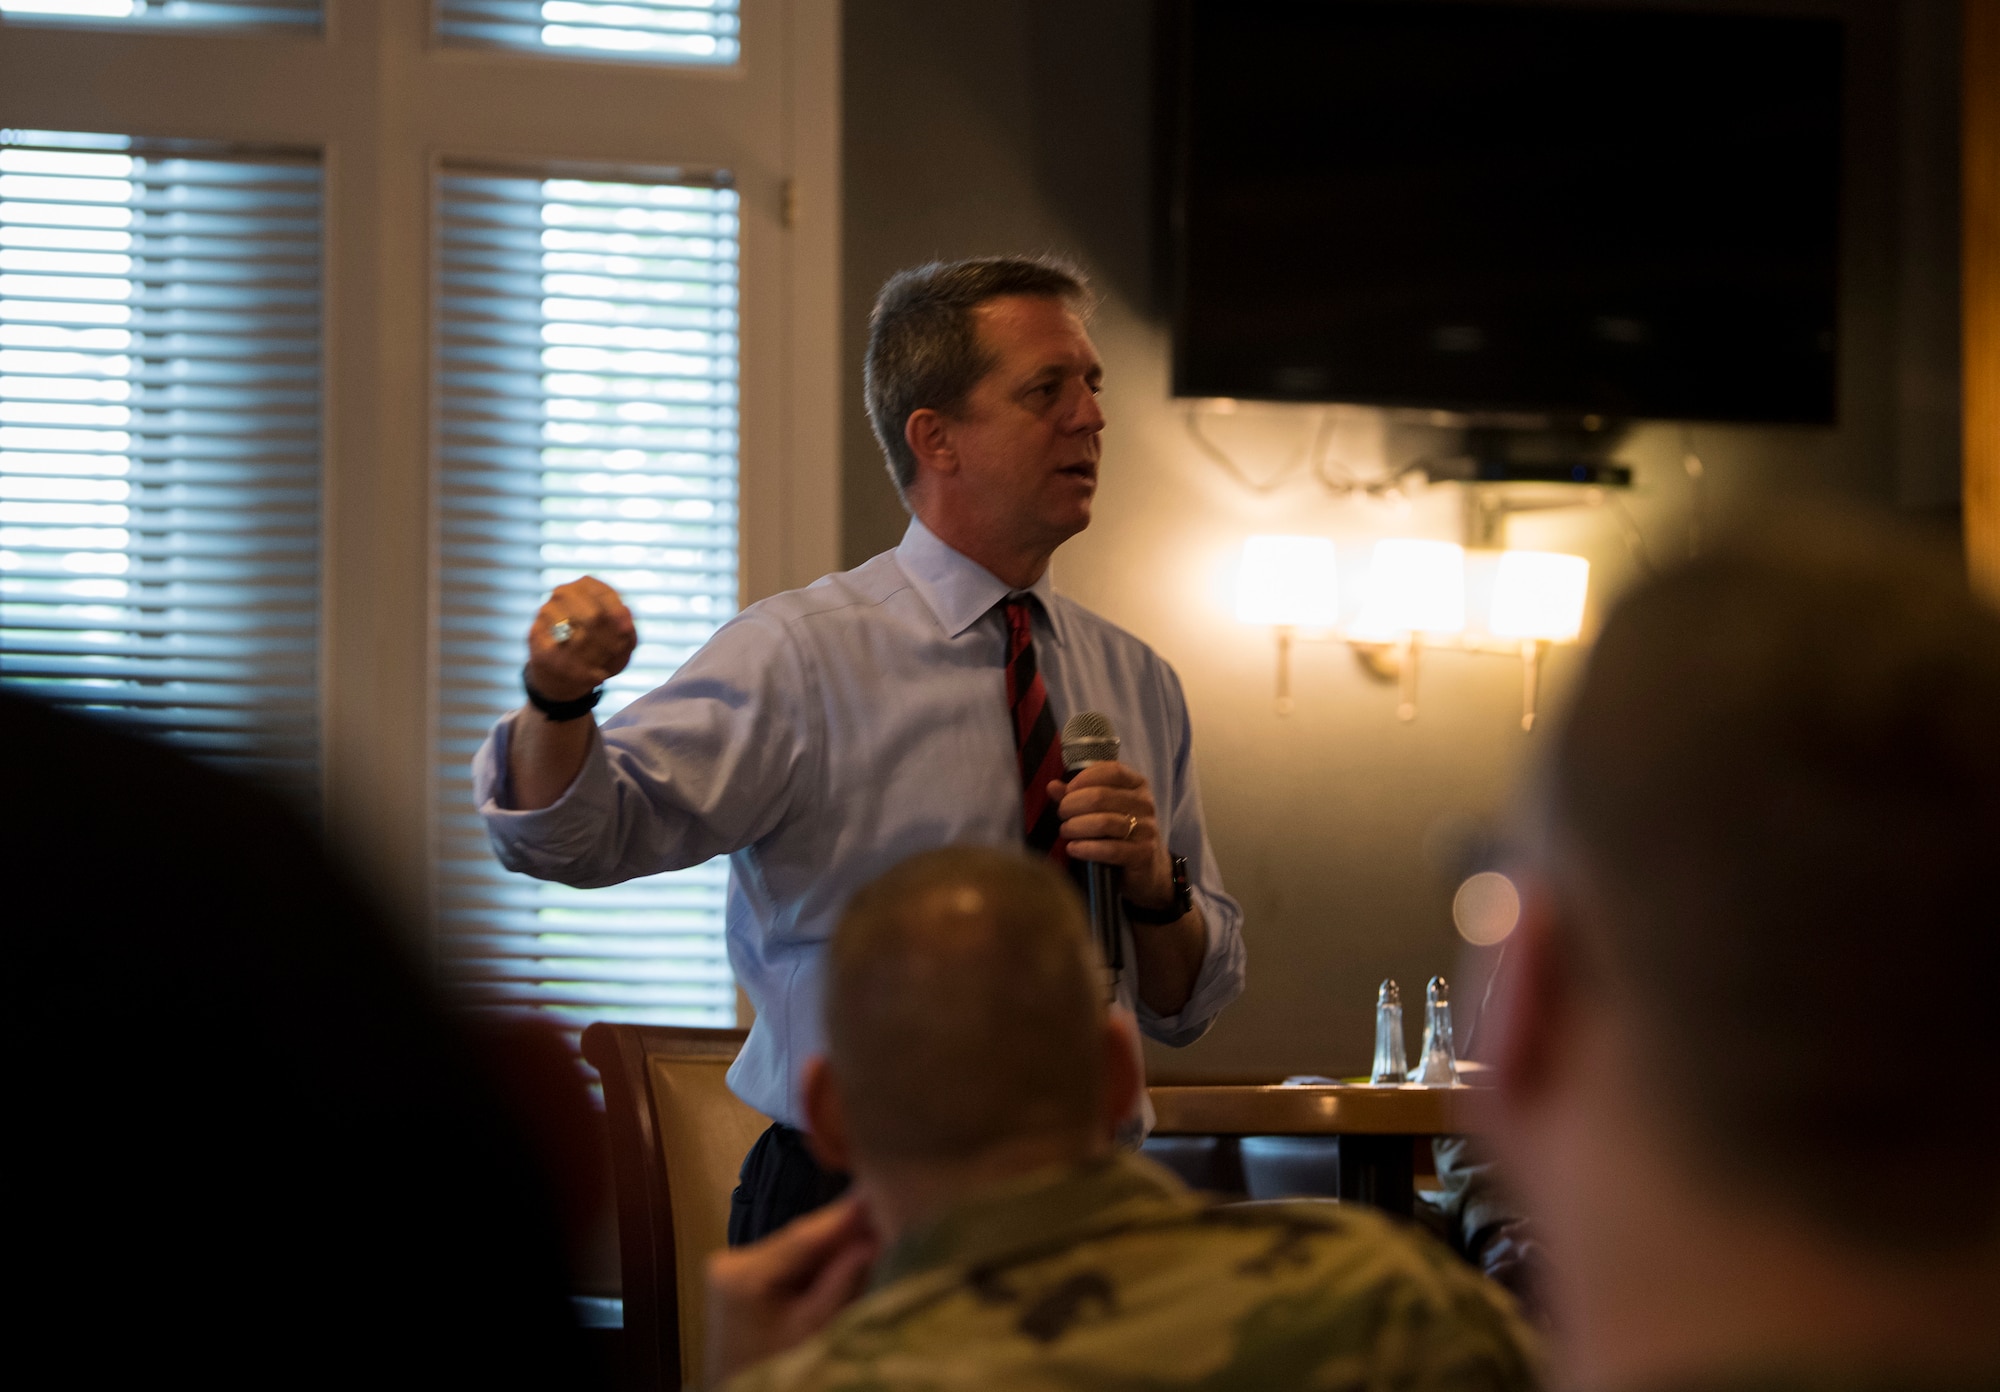 James Smith Jr., University of South Carolina (USC) executive director of military programs and strategies, discusses his leadership perspective to 50 Team Shaw members during the second session of the Team Shaw Leadership Development Council and USC Leadership Discussion Series (LDS) at Shaw Air Force Base, South Carolina, Aug. 15, 2019.